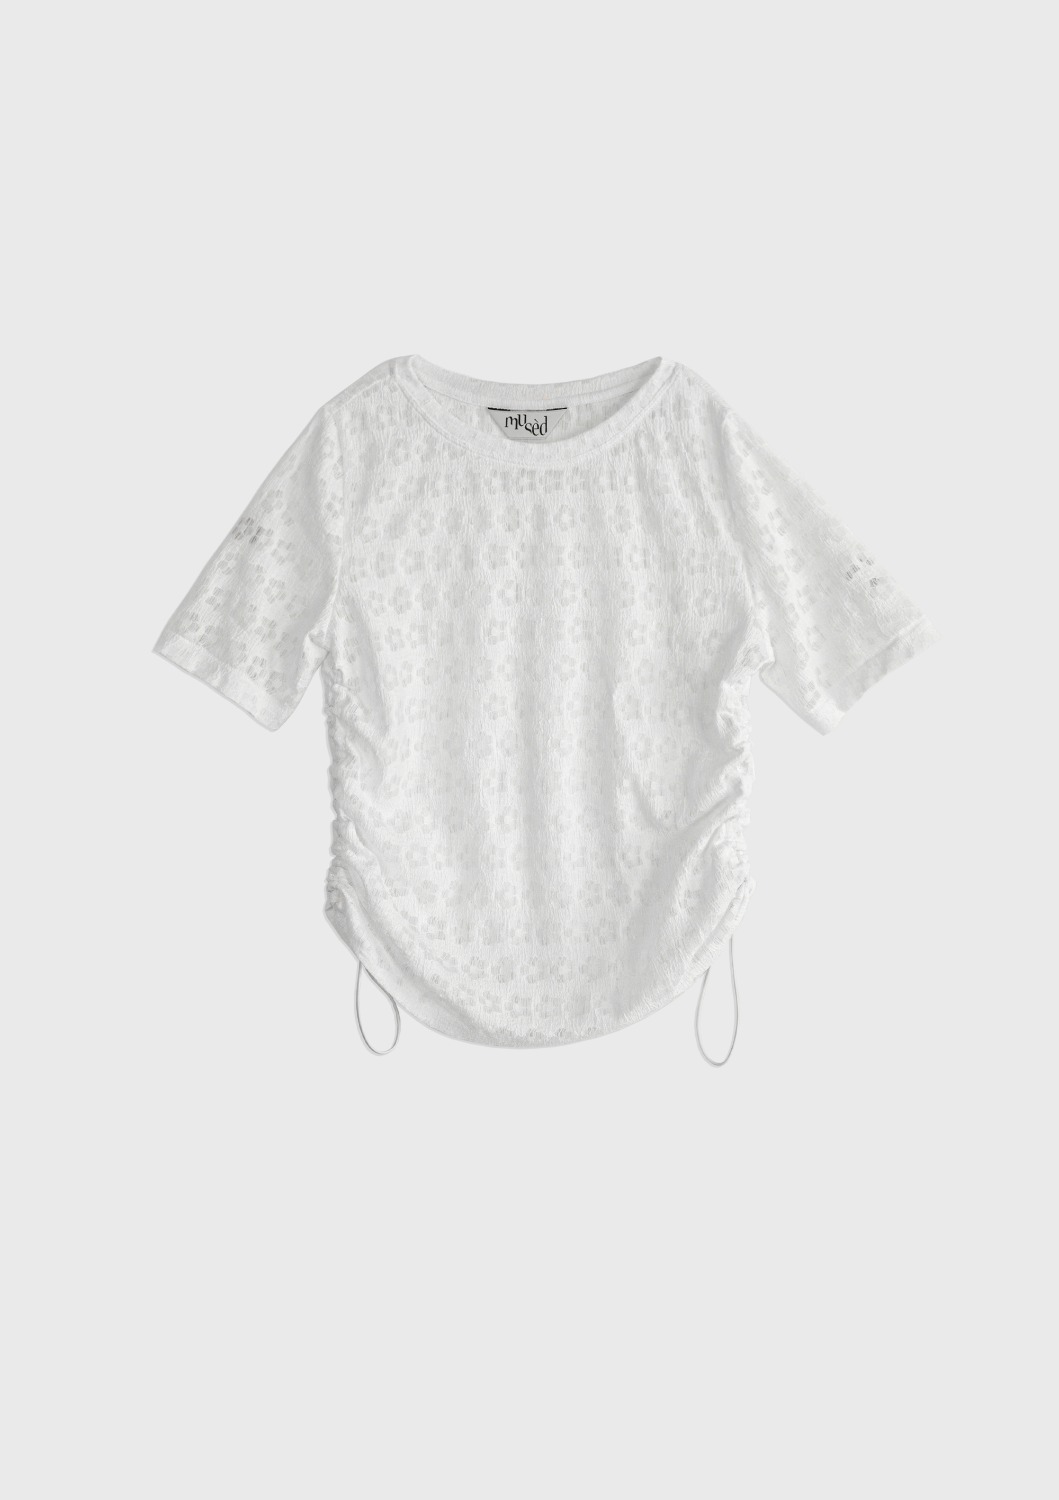 Mused Floral Sheer Top - Floral White